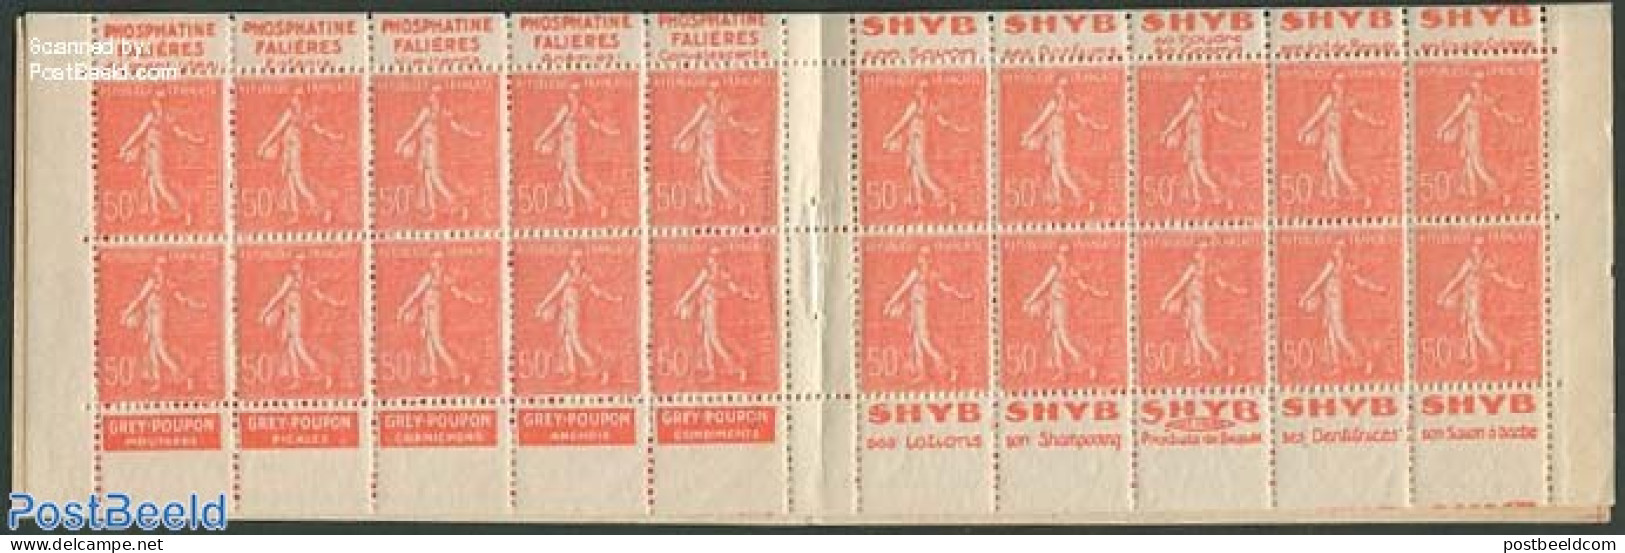 France 1924 20x50c Booklet (Falieres-Shyb-Grey Poupon-Shyb), Mint NH, Stamp Booklets - Unused Stamps